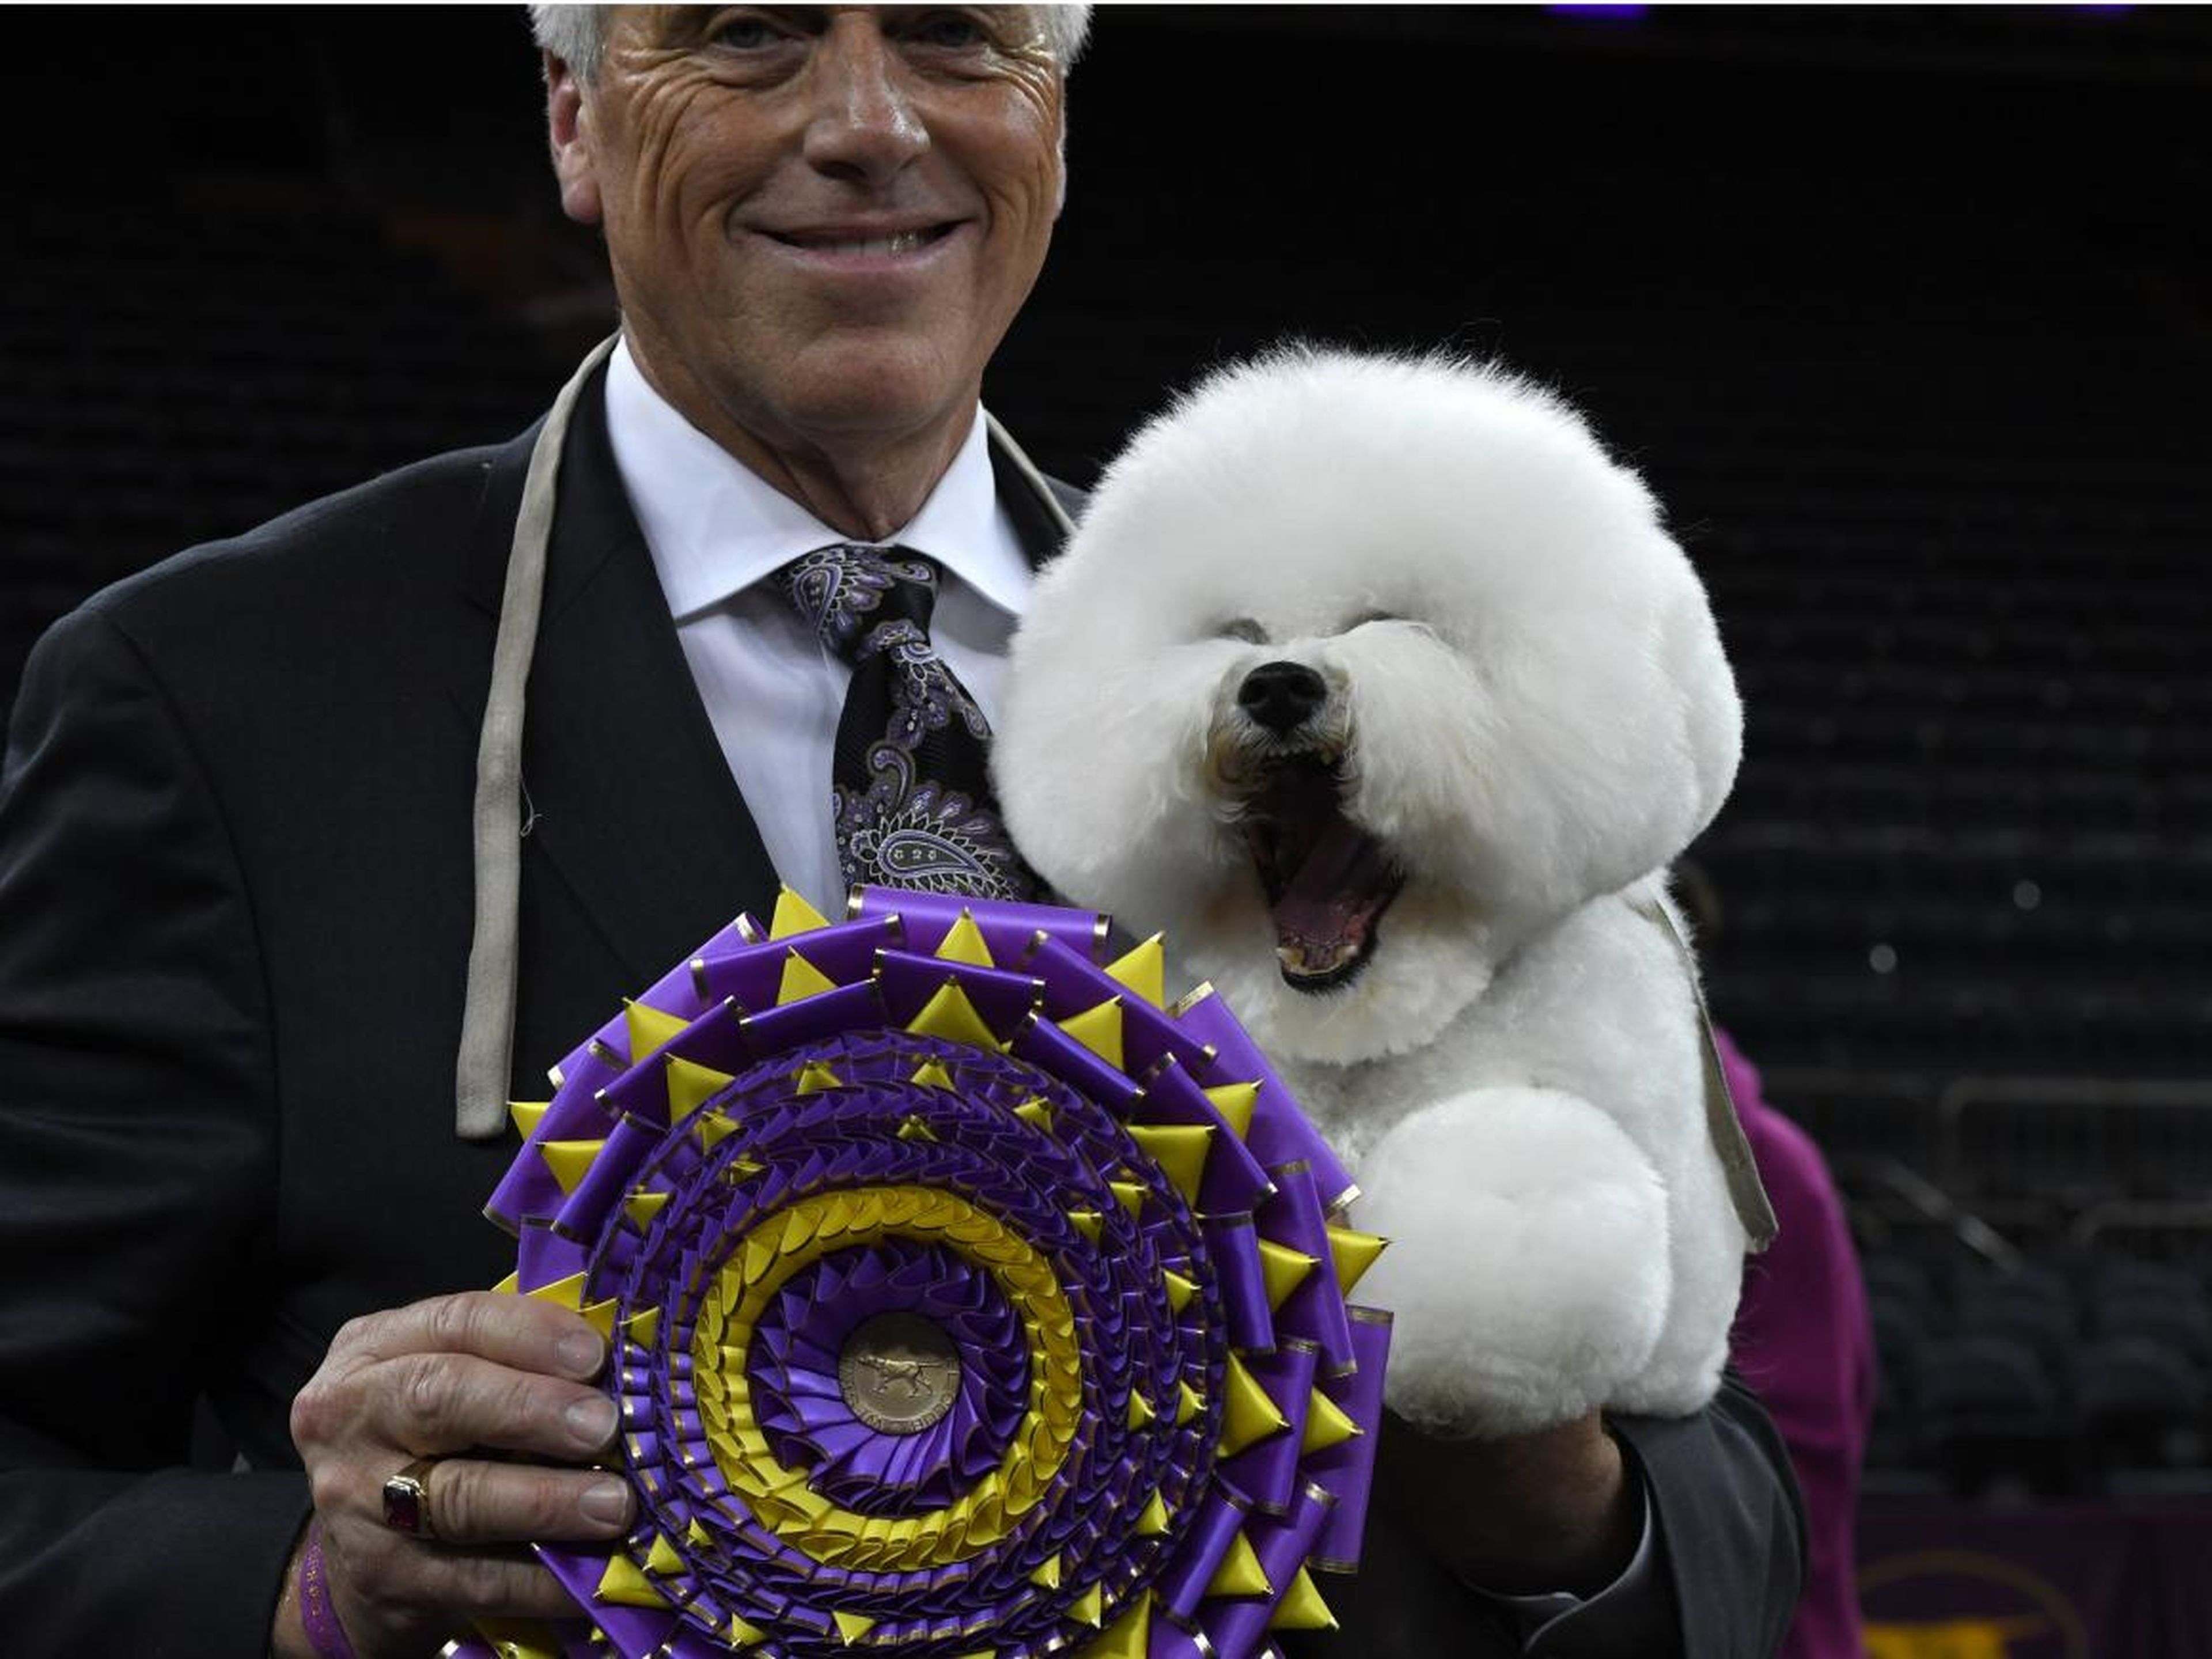 Flynn the Bichon Frise, with handler Bill McFadden, poses after winning Best in Show at the Westminster Kennel Club 142nd Annual Dog Show.